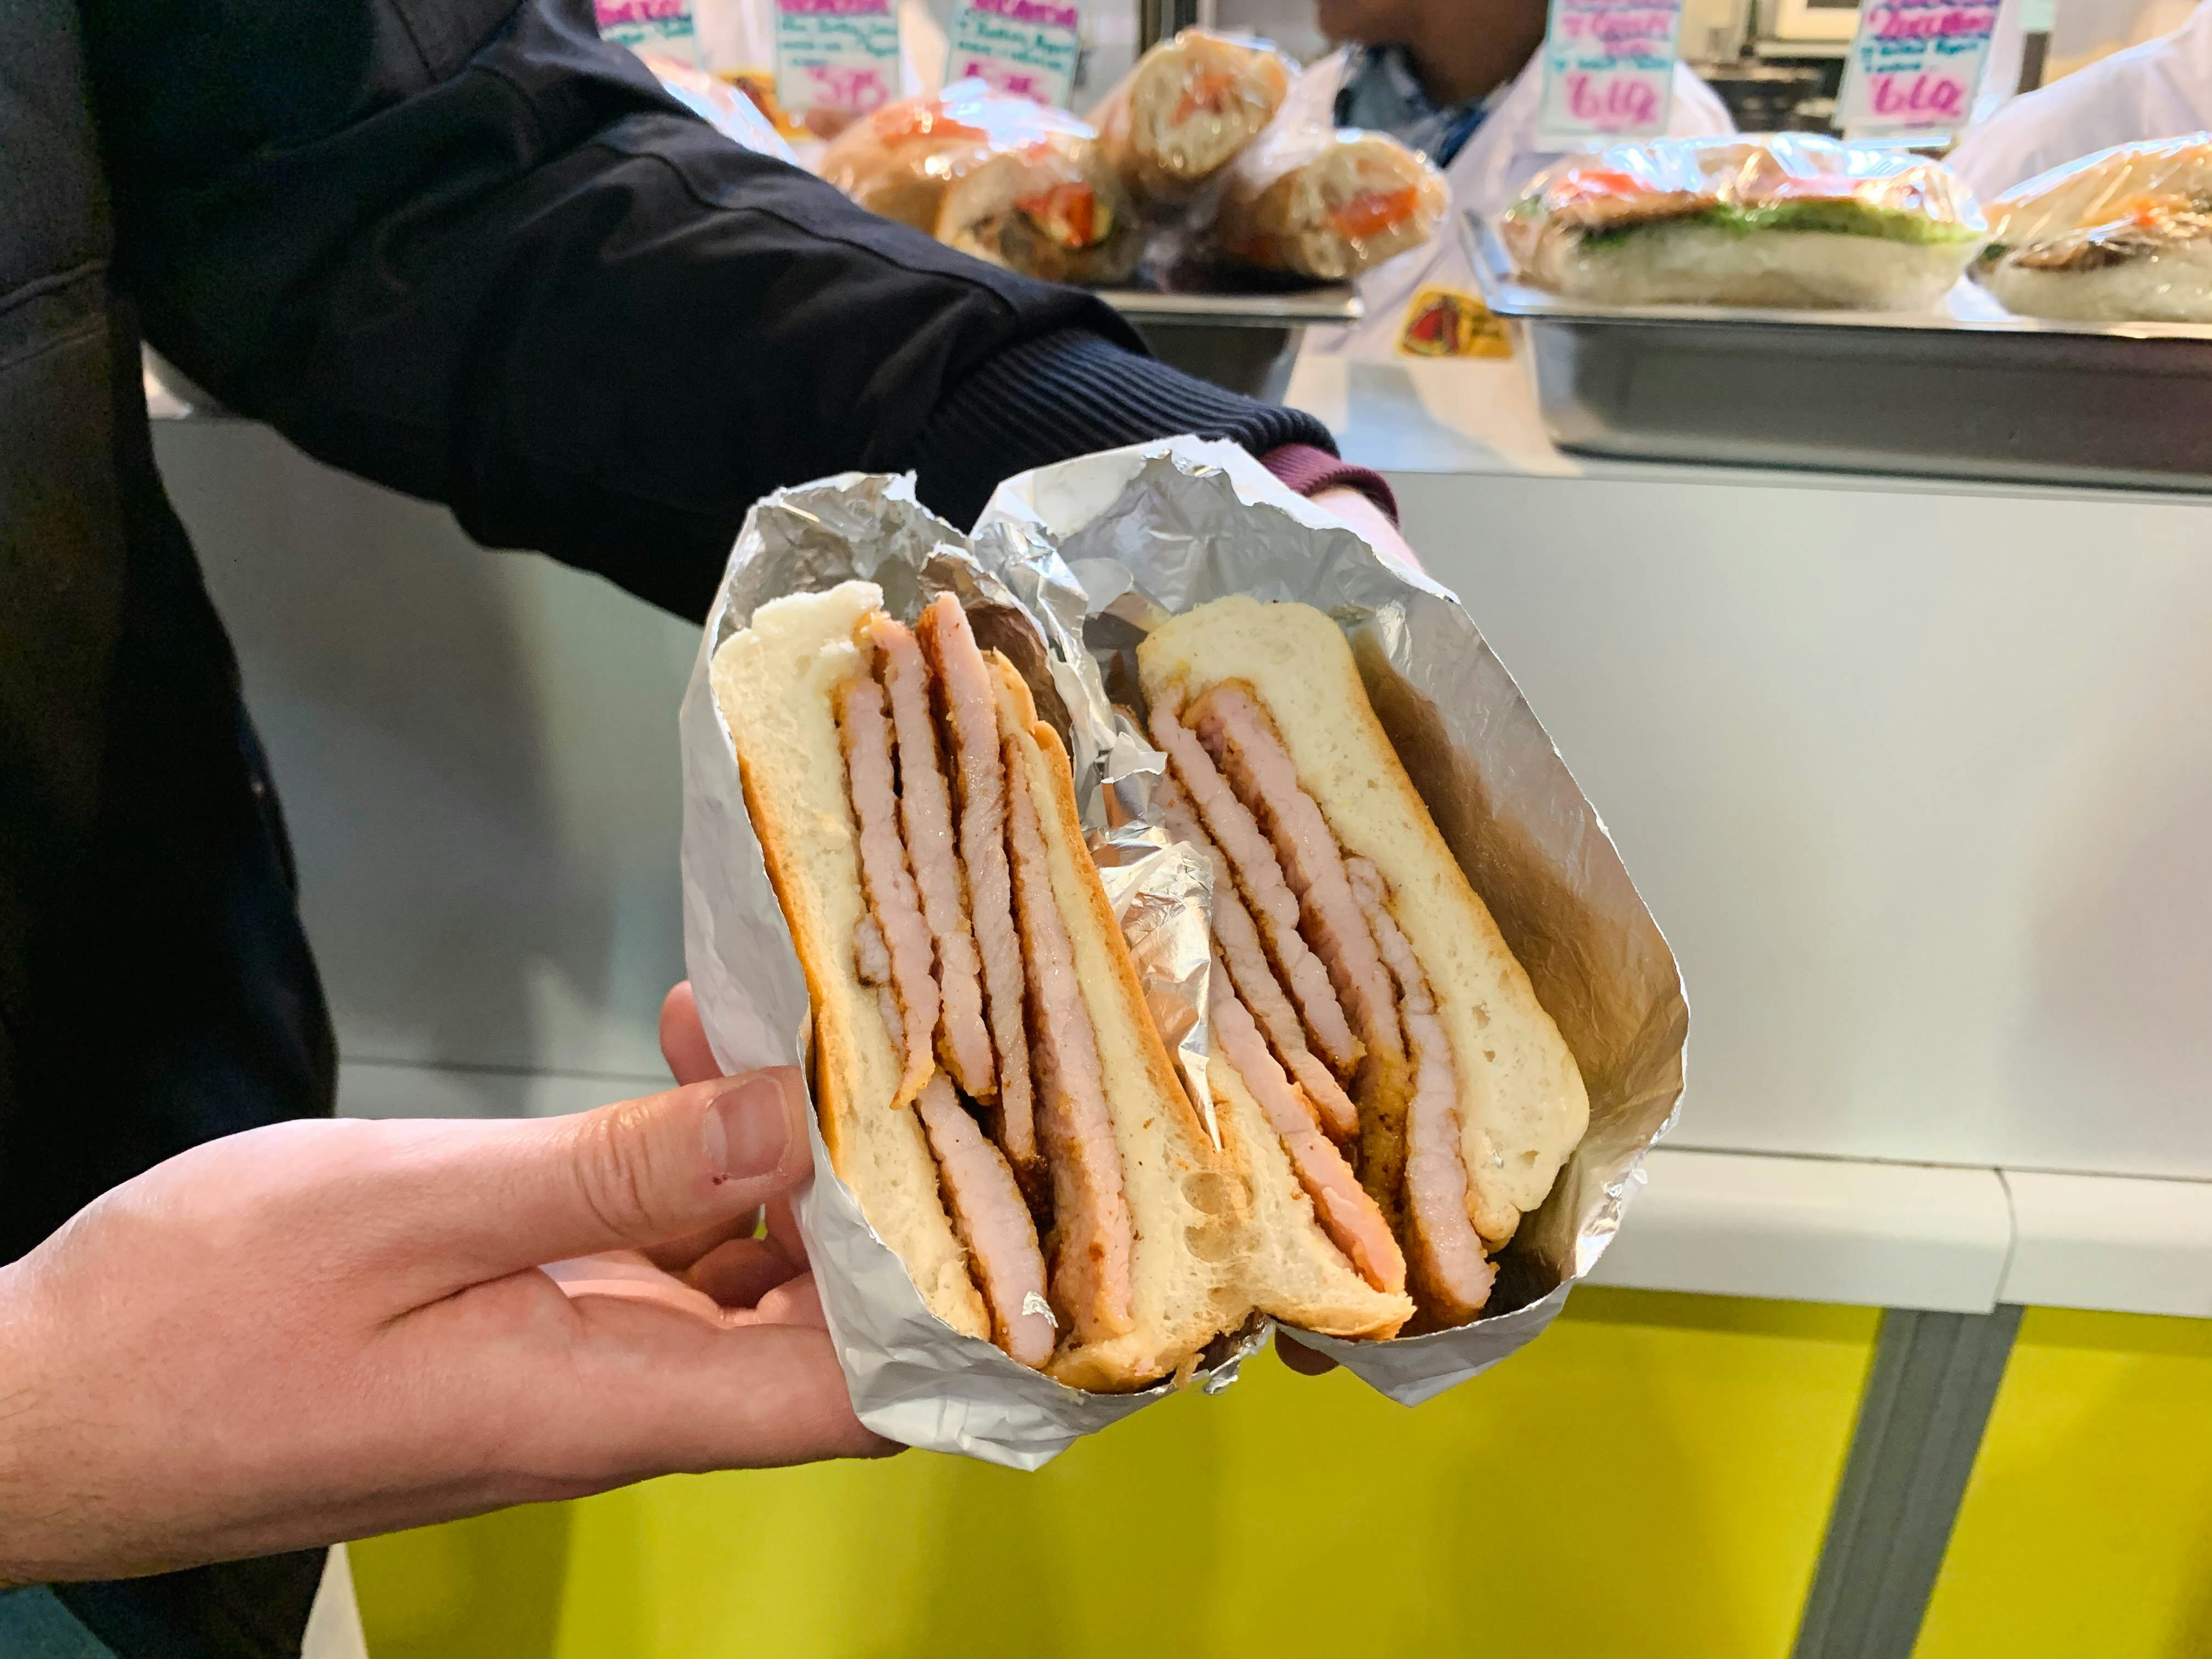 A hand holding a sandwich filled with thick slices of Canadian bacon